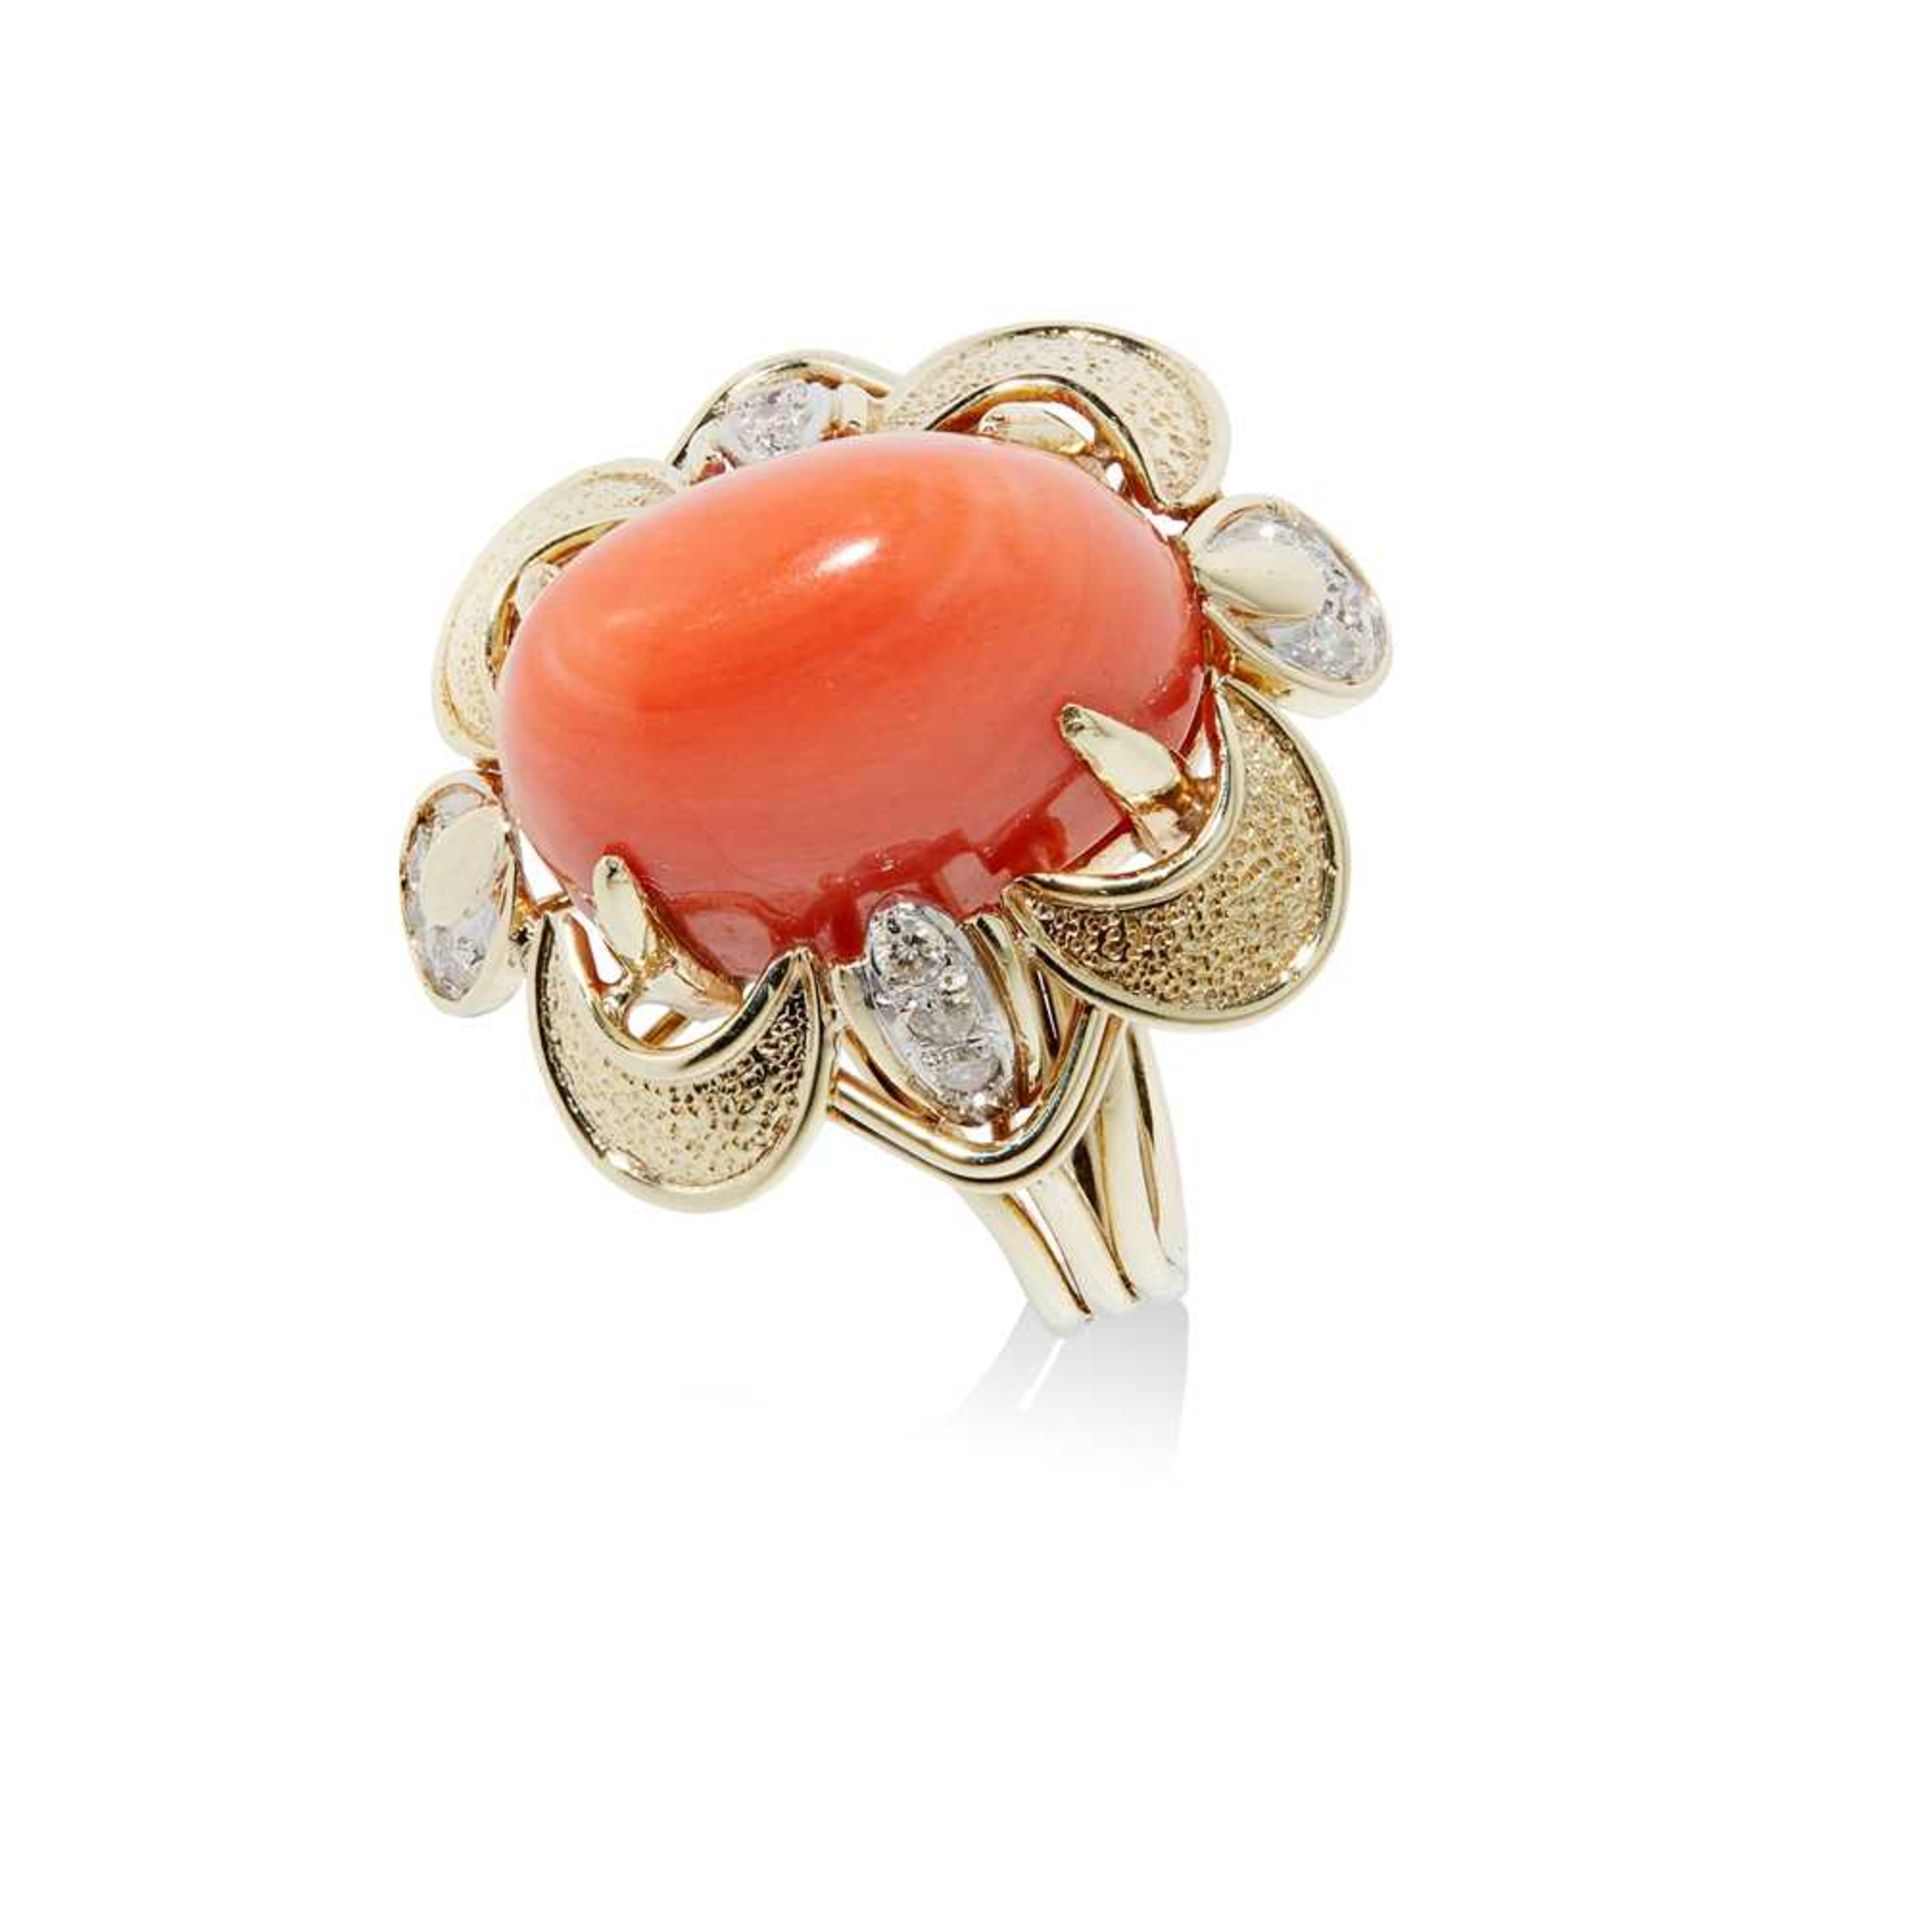 A mid-20th century coral and diamond cocktail ring